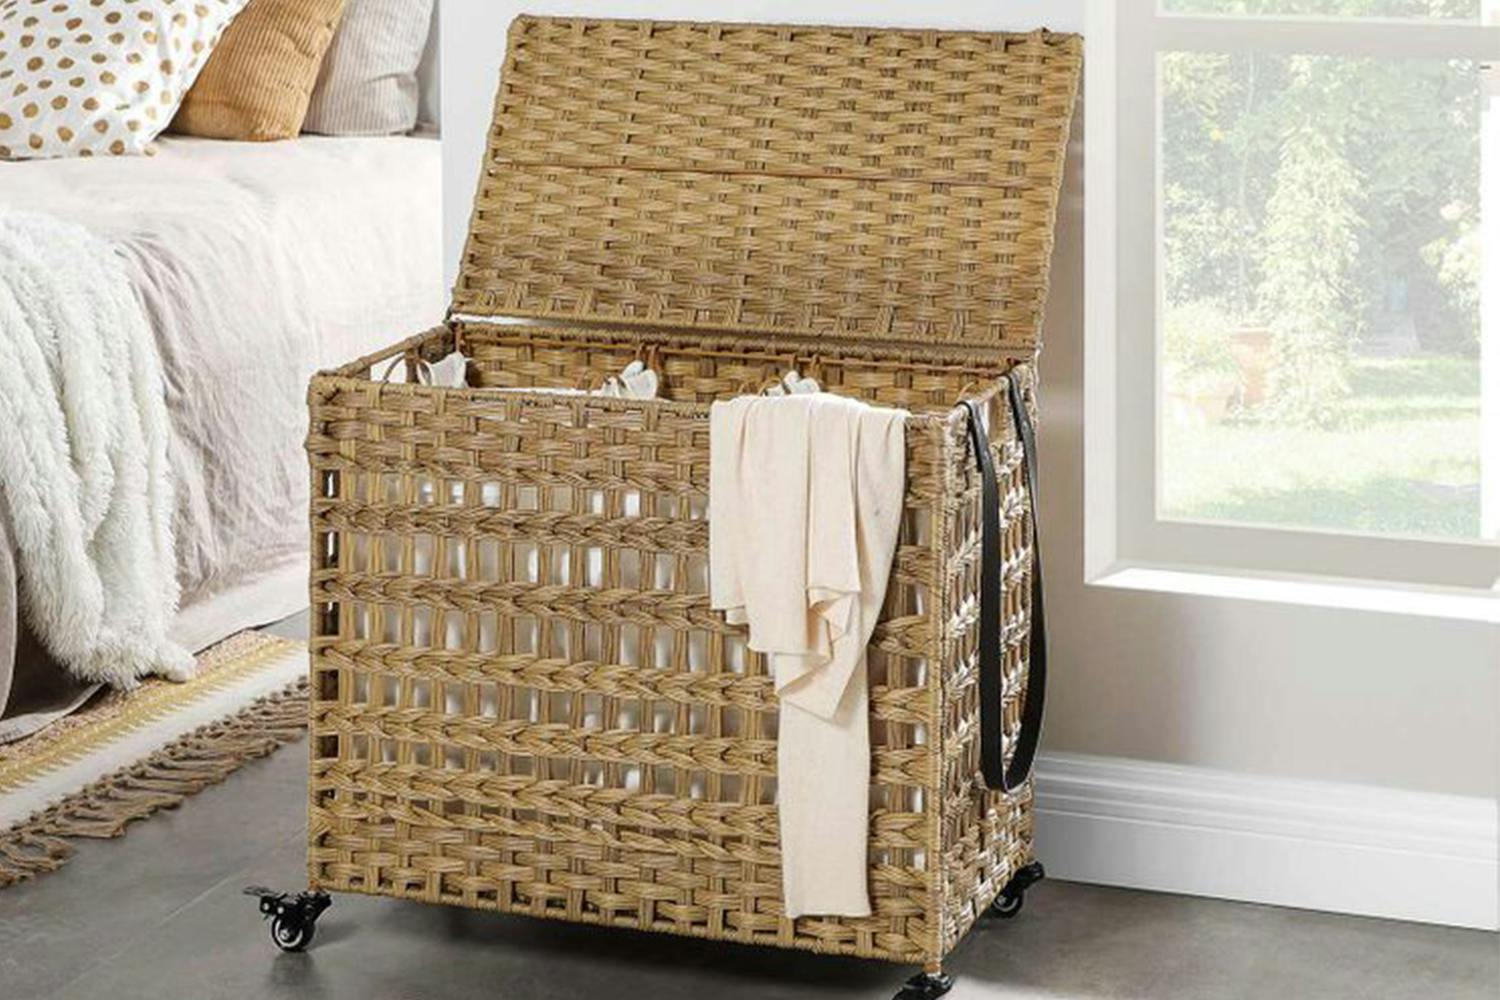 Songmics ULCB083N01 Laundry Basket With 3 Compartments